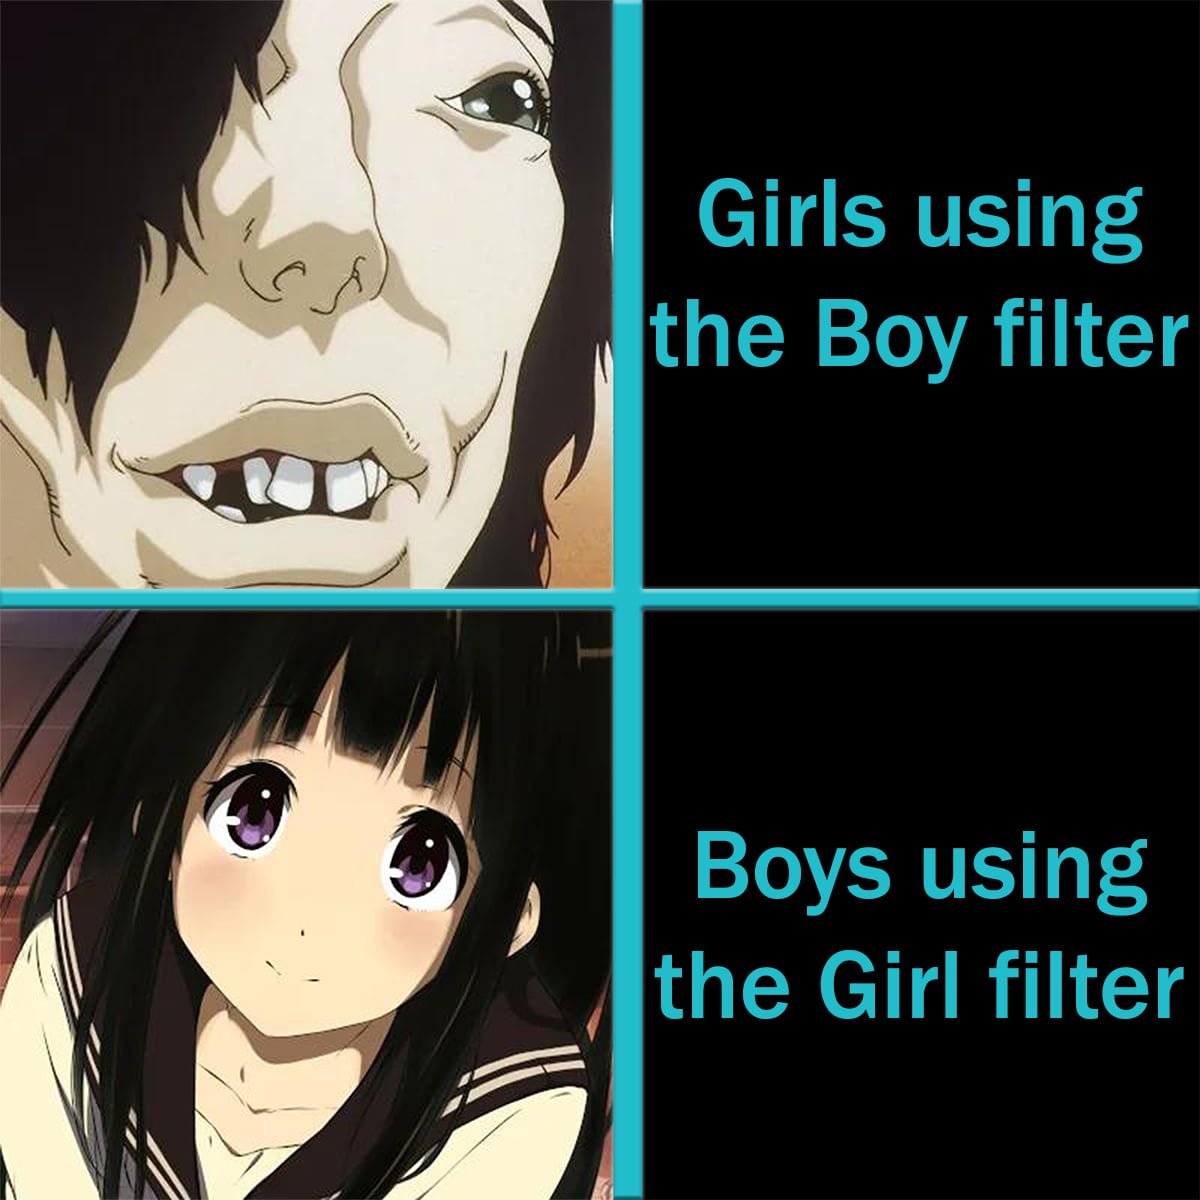 When Girls use Boy filters compared to Boys using Girl filters